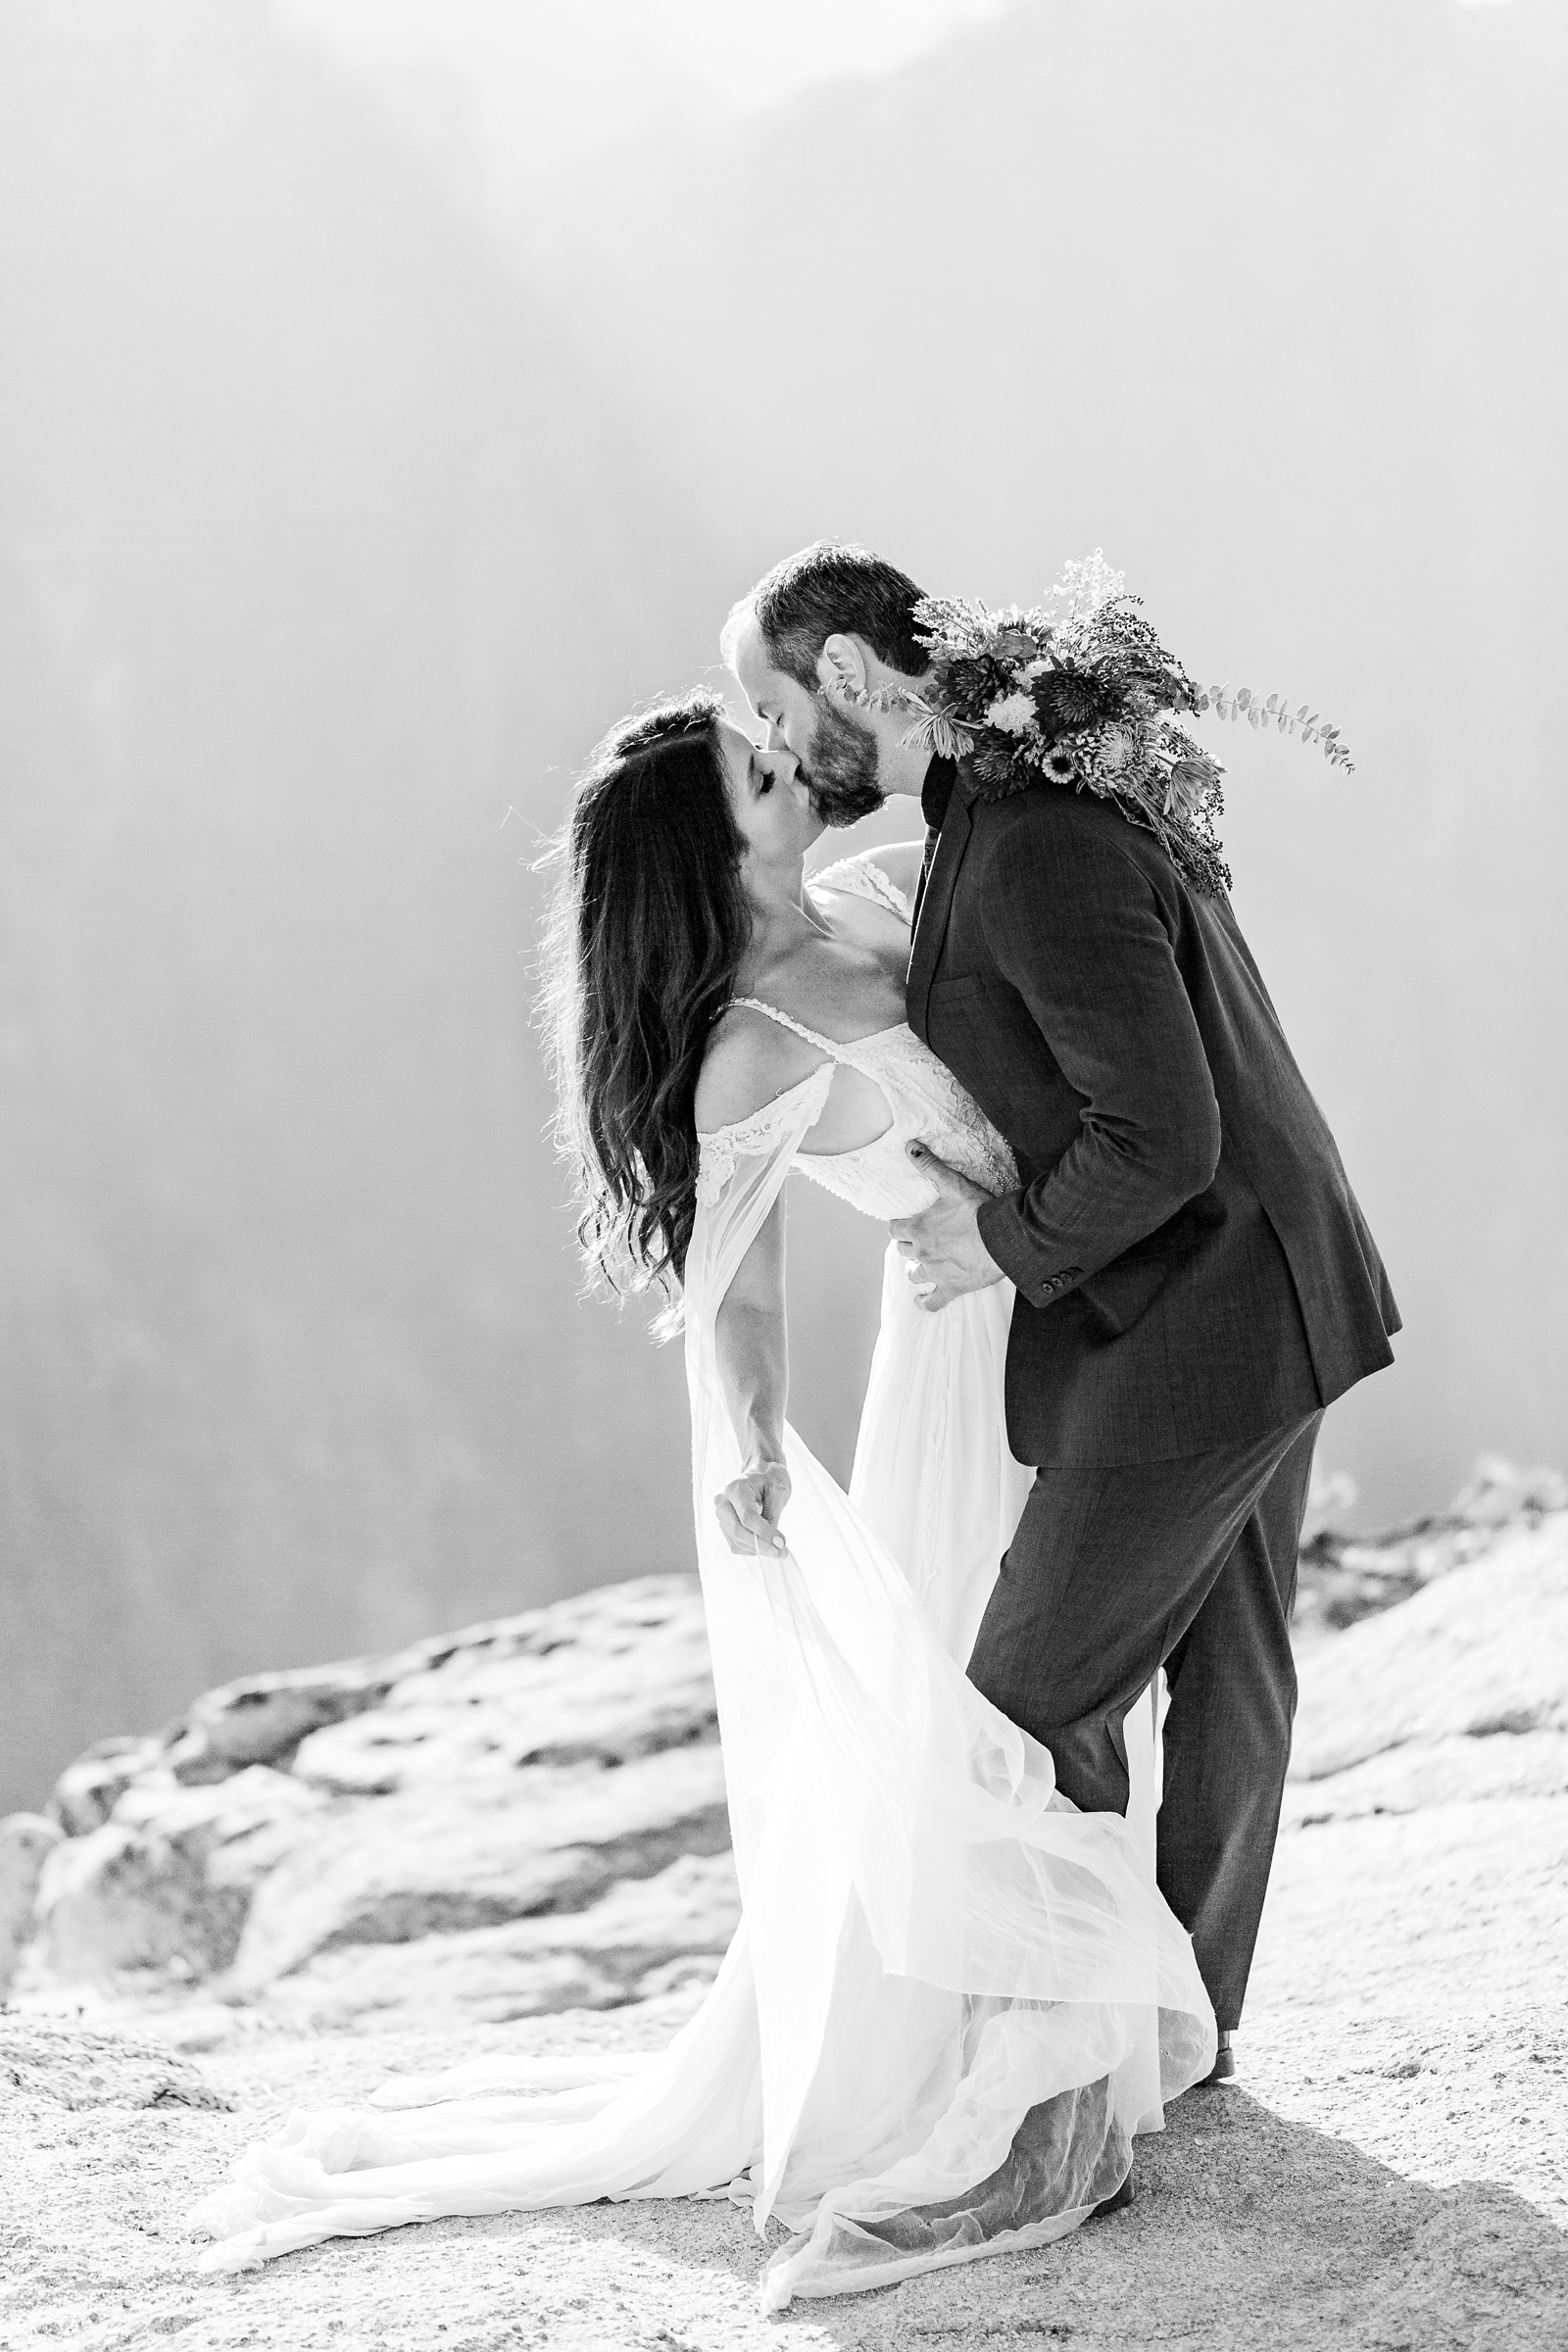 Magically windy kiss at this couple's Yosemite elopement.